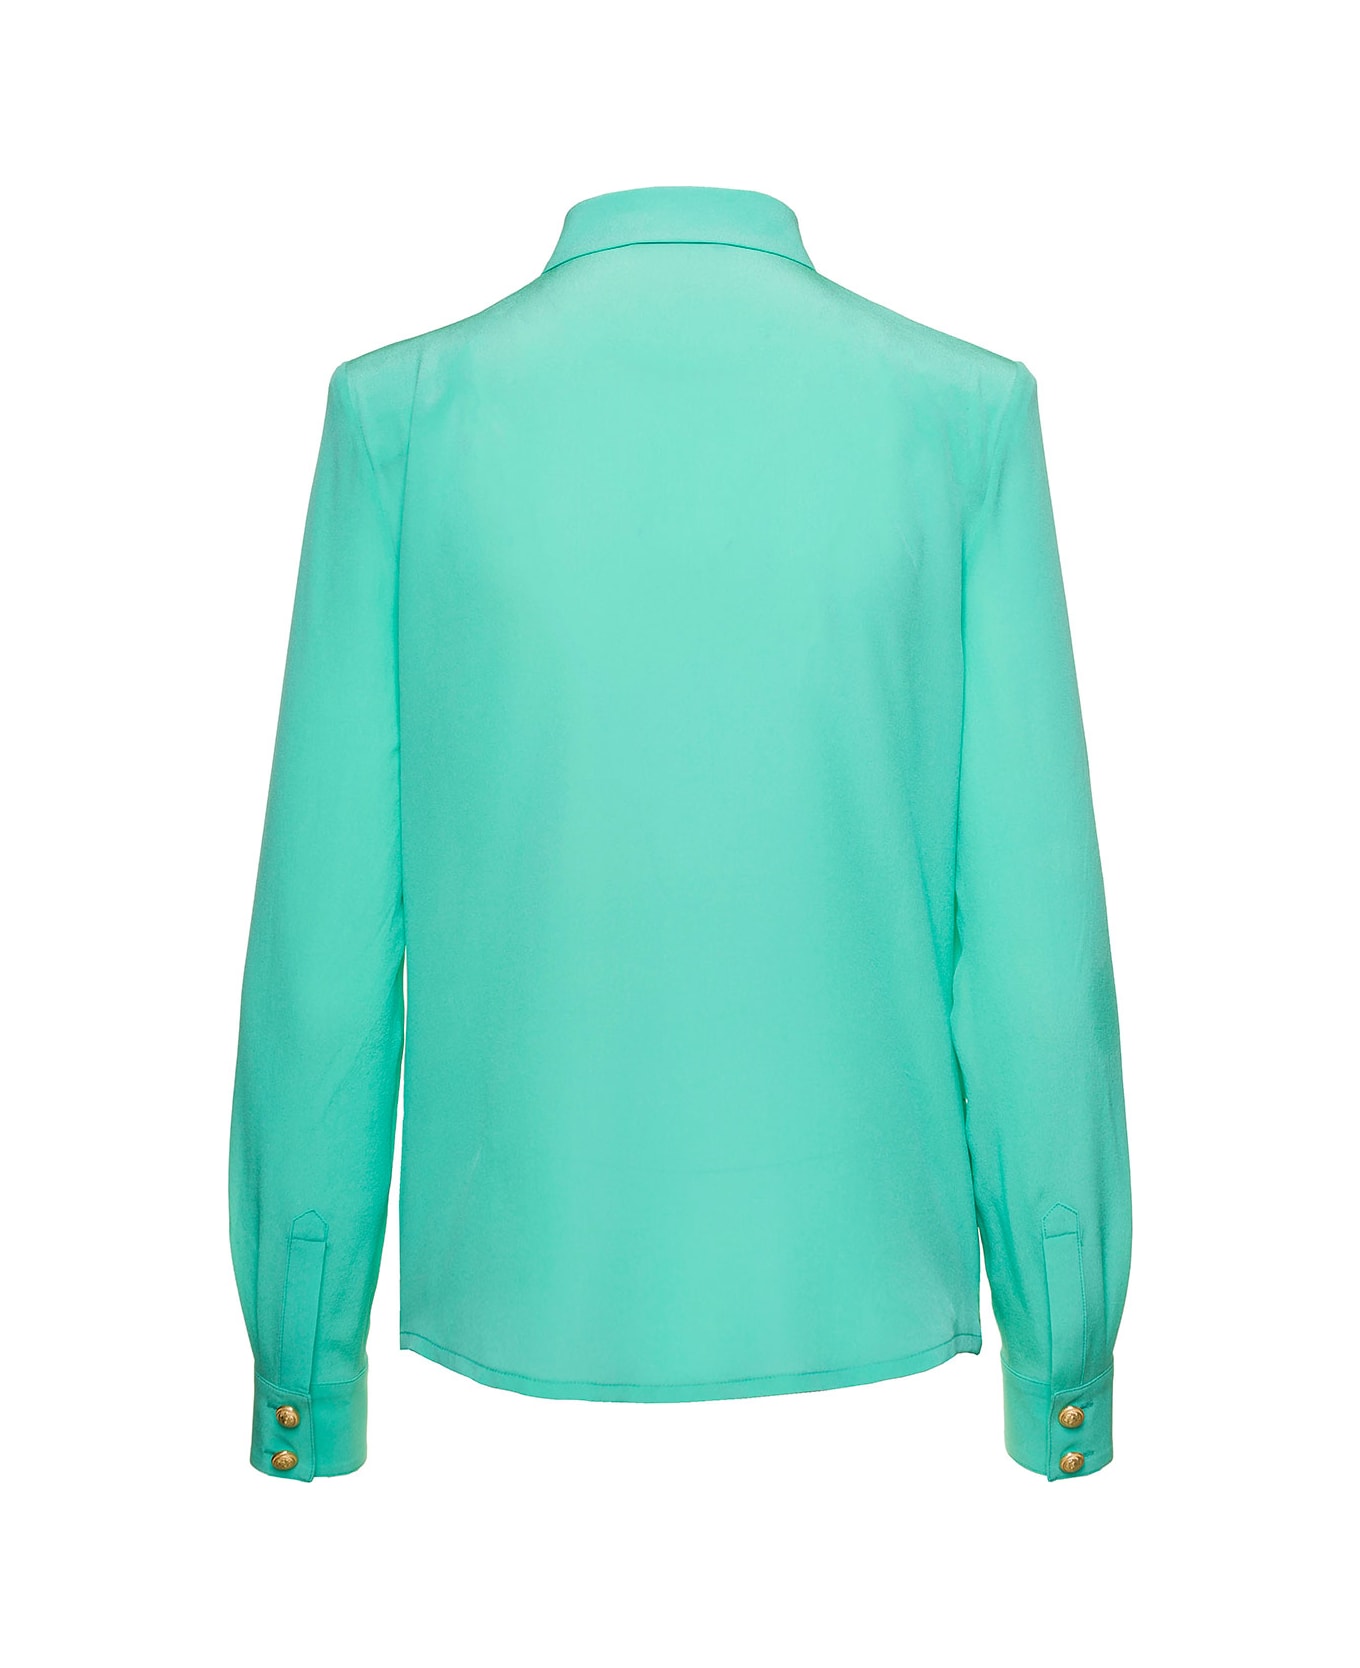 Balmain Light Blue Shirt With Jewel Buttons And Pockets In Crepe De Chine Woman - Green